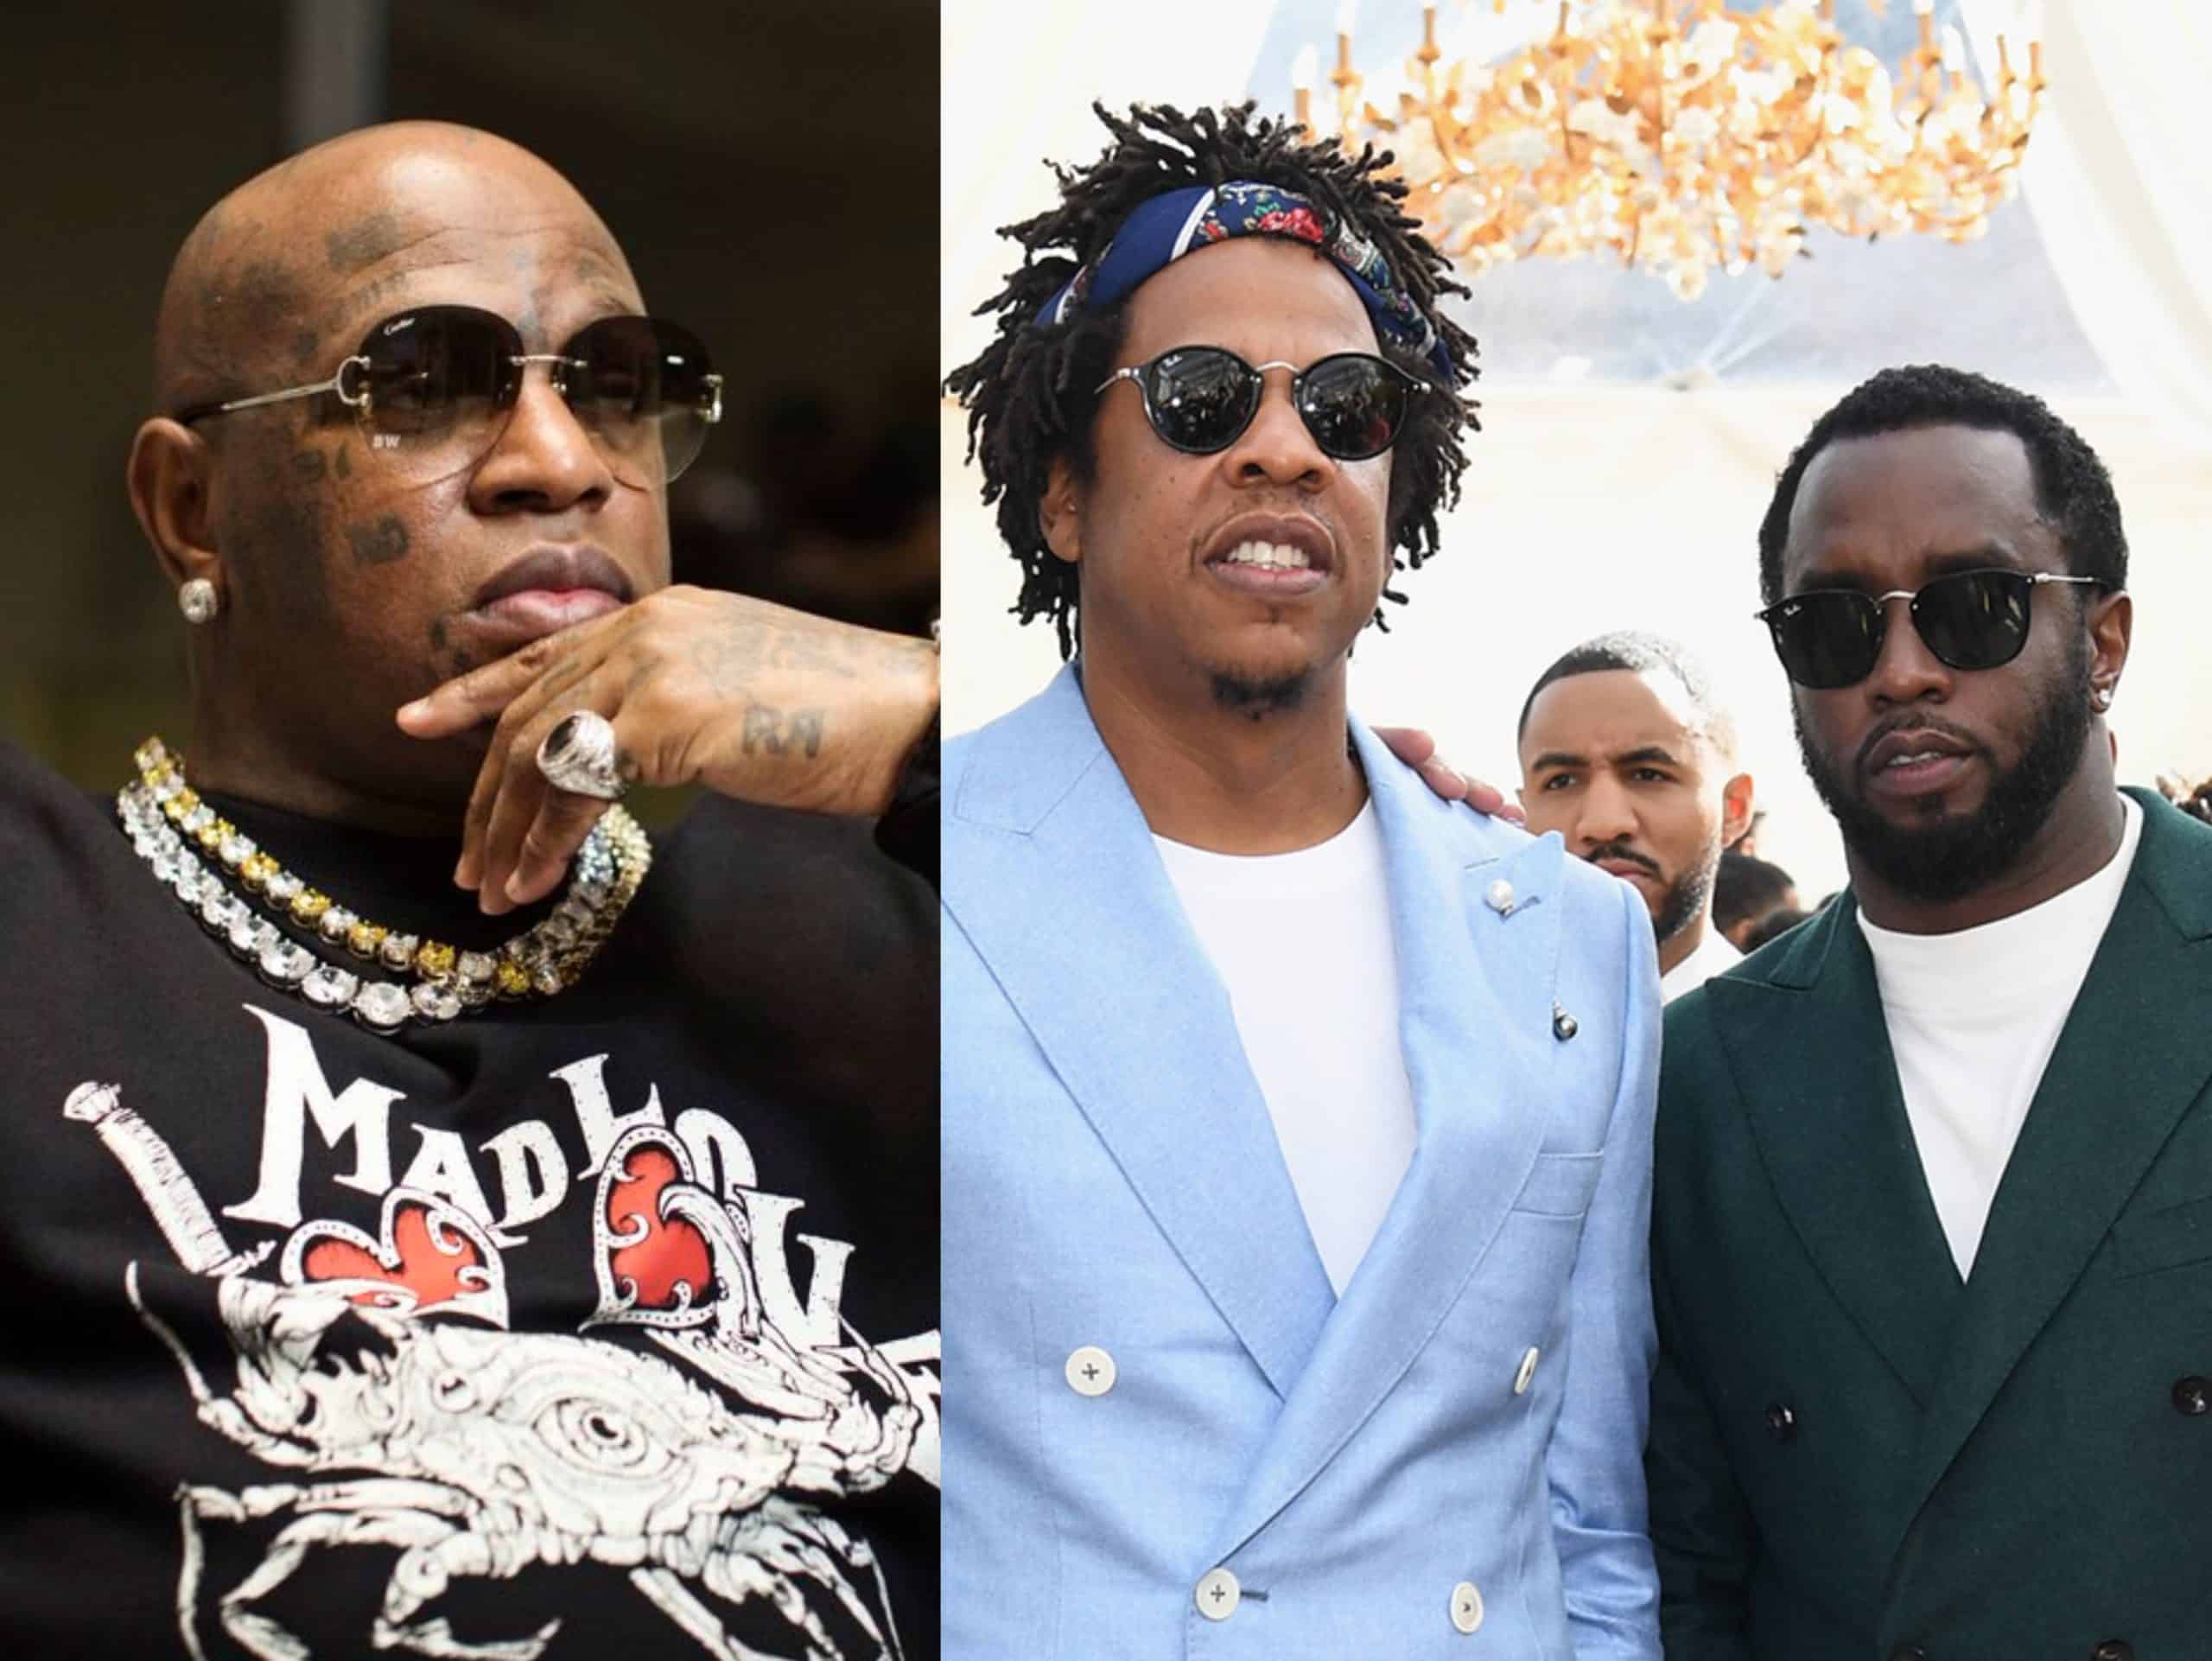 Birdman Claims He Accomplished More Than Jay-Z & Diddy